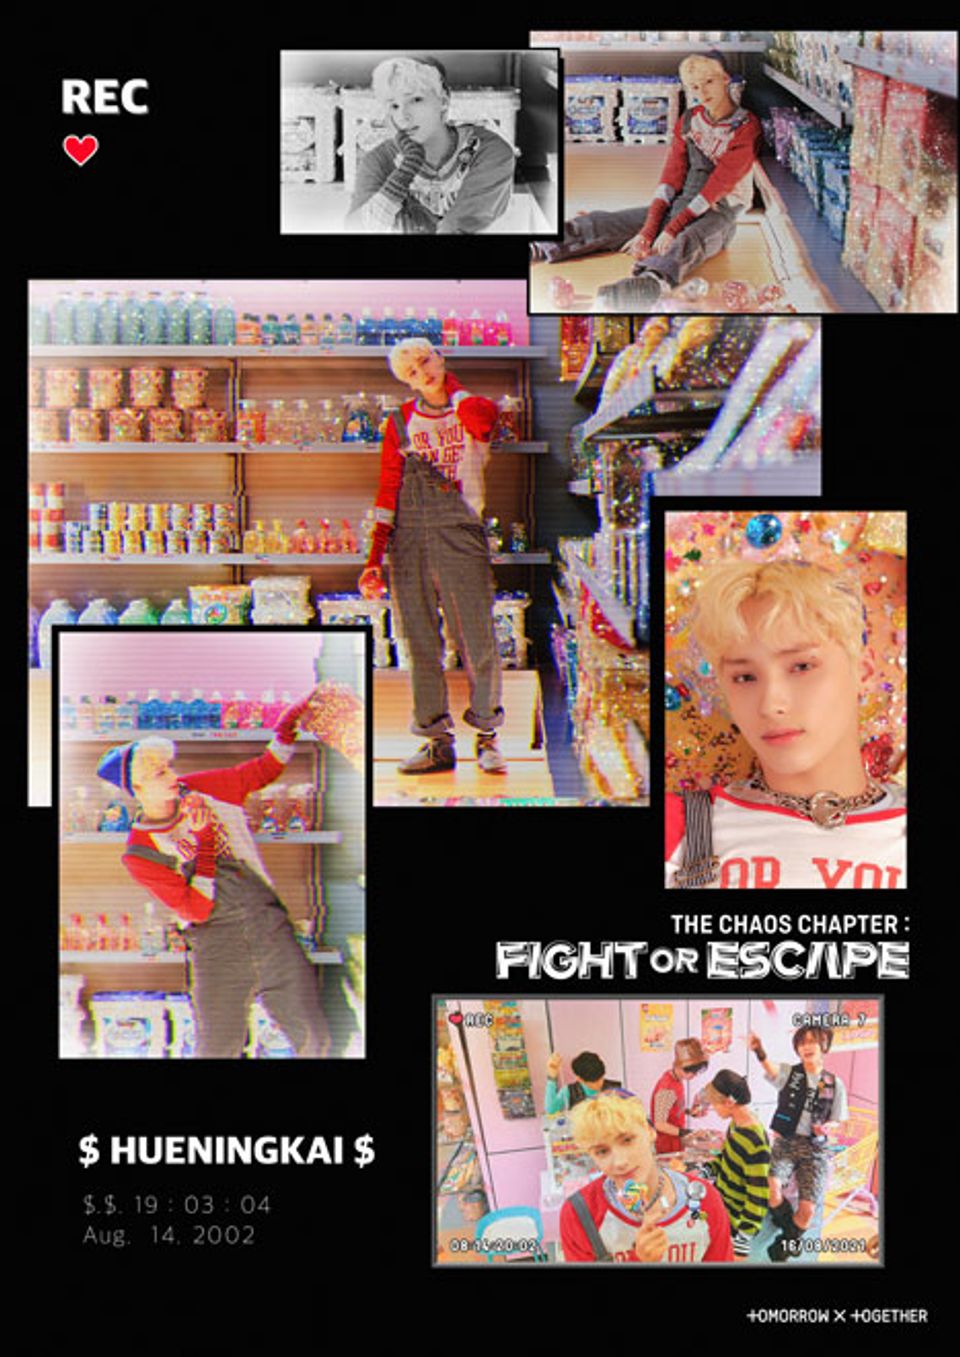 TXT 2nd Full Repackage Album "The Chaos Chapter : Fight or